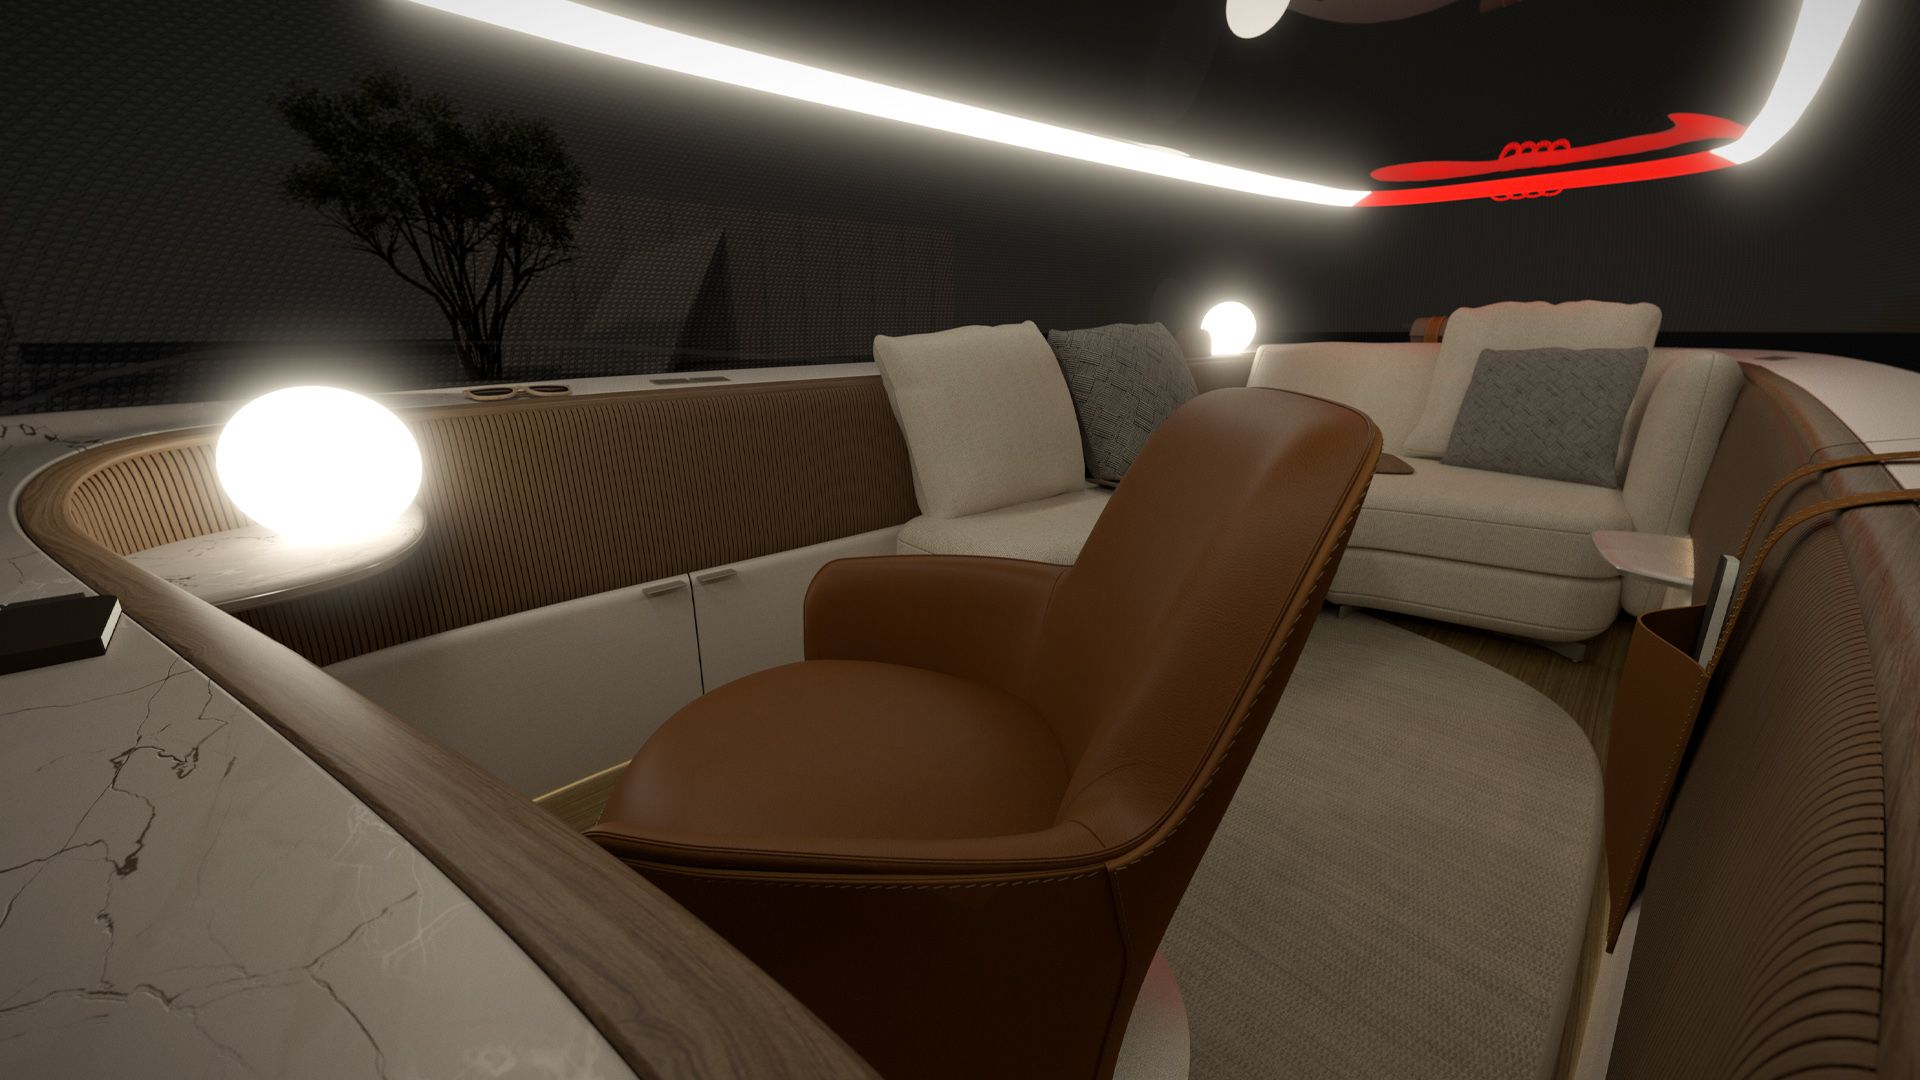 Poliform's interior design shows how the interior is illuminated in the dark with various light elements.